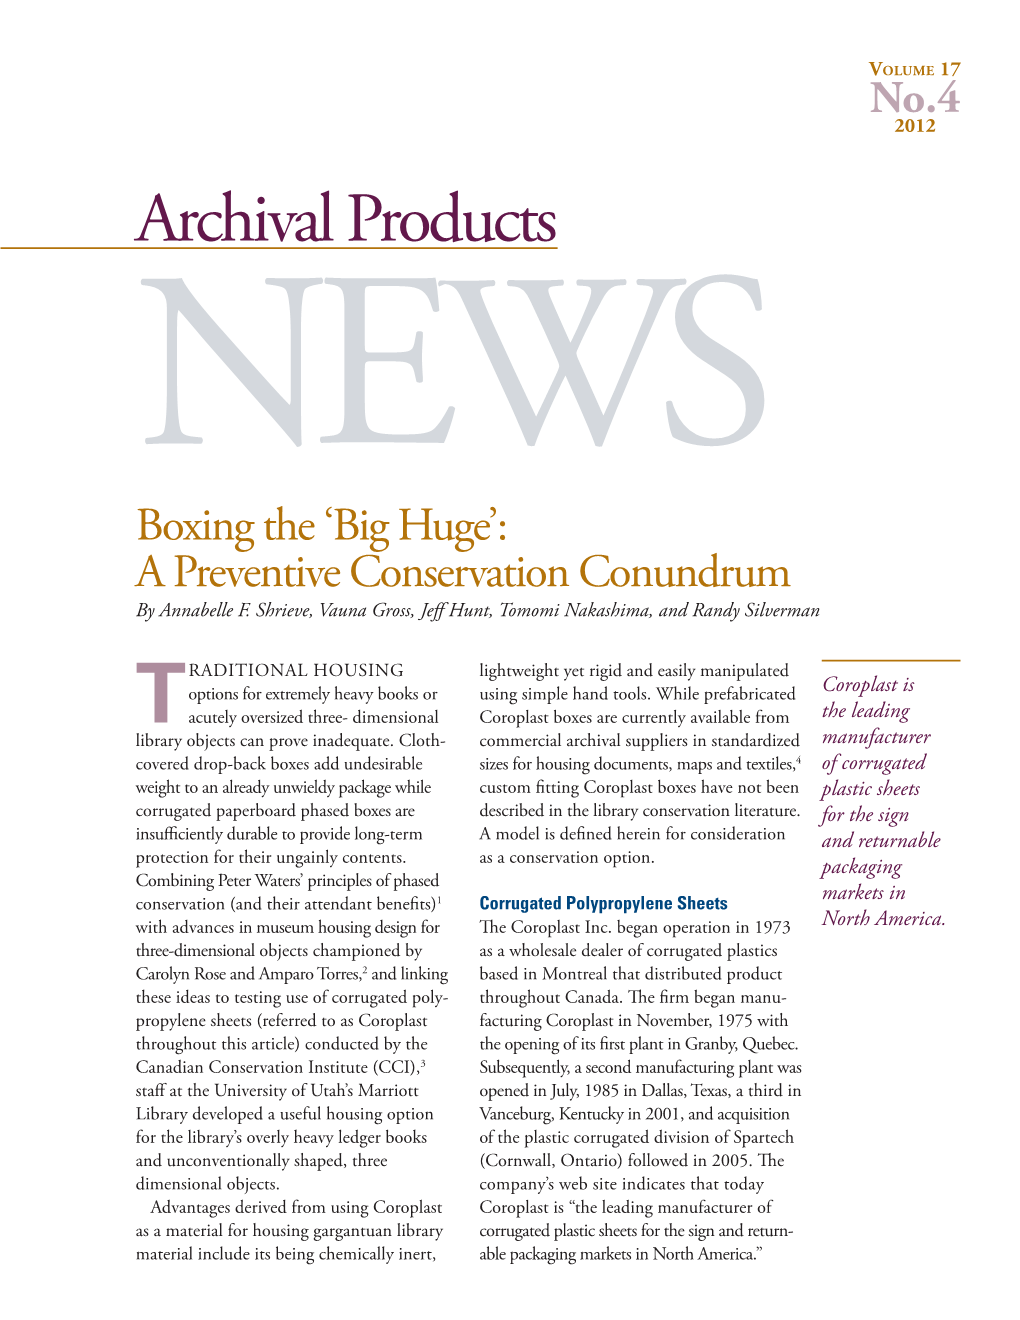 Archival Products NEWS Boxing the ‘Big Huge’: a Preventive Conservation Conundrum by Annabelle F